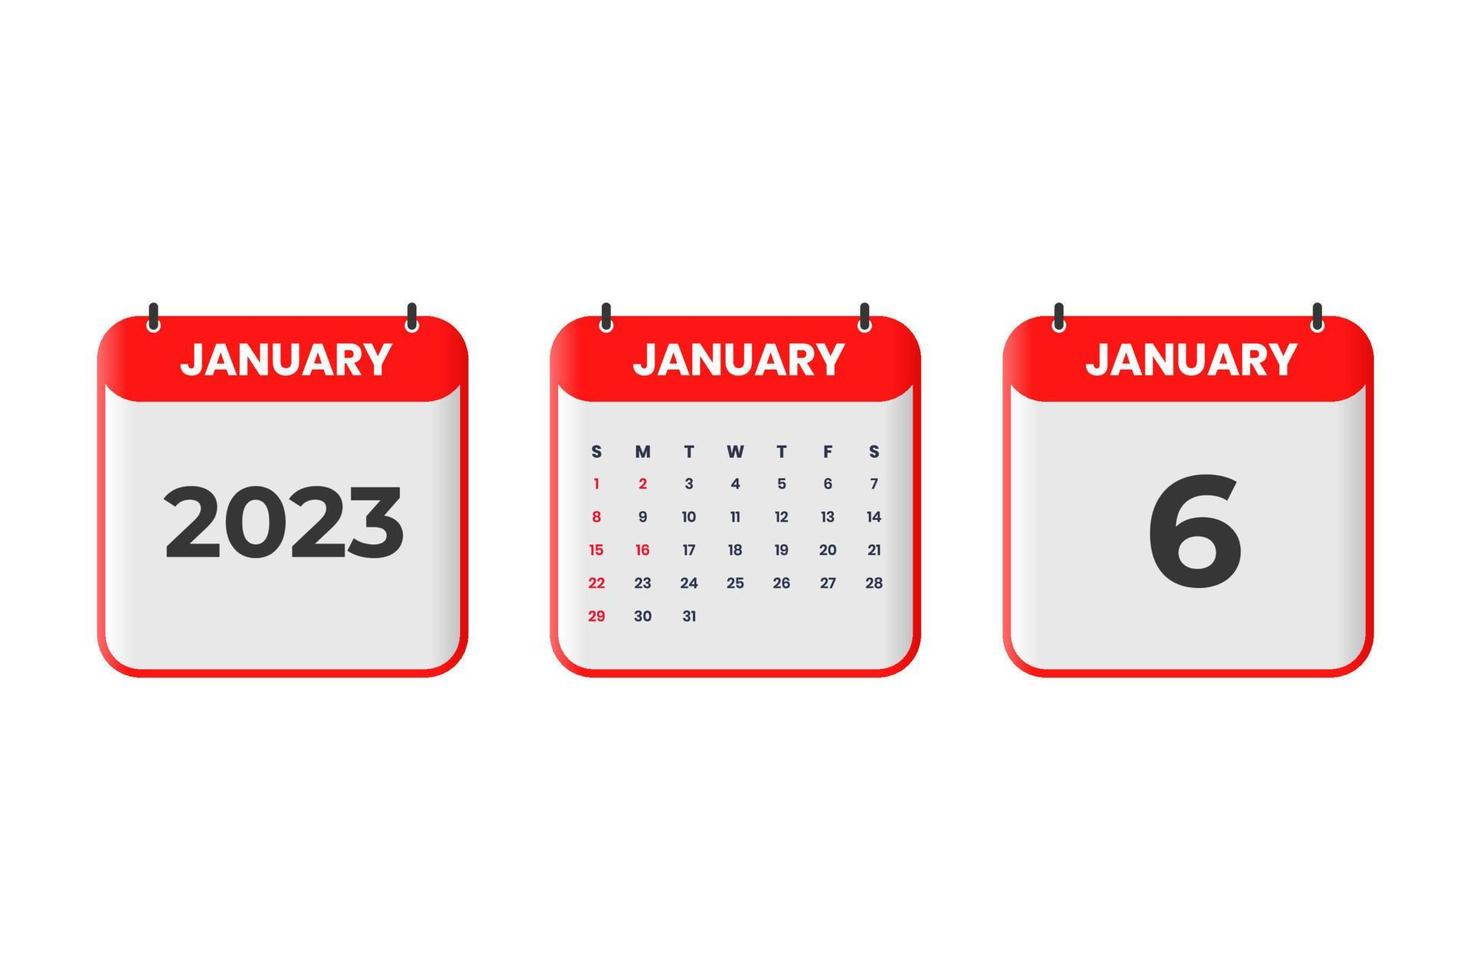 January 2023 calendar design. 6th January 2023 calendar icon for schedule, appointment, important date concept vector